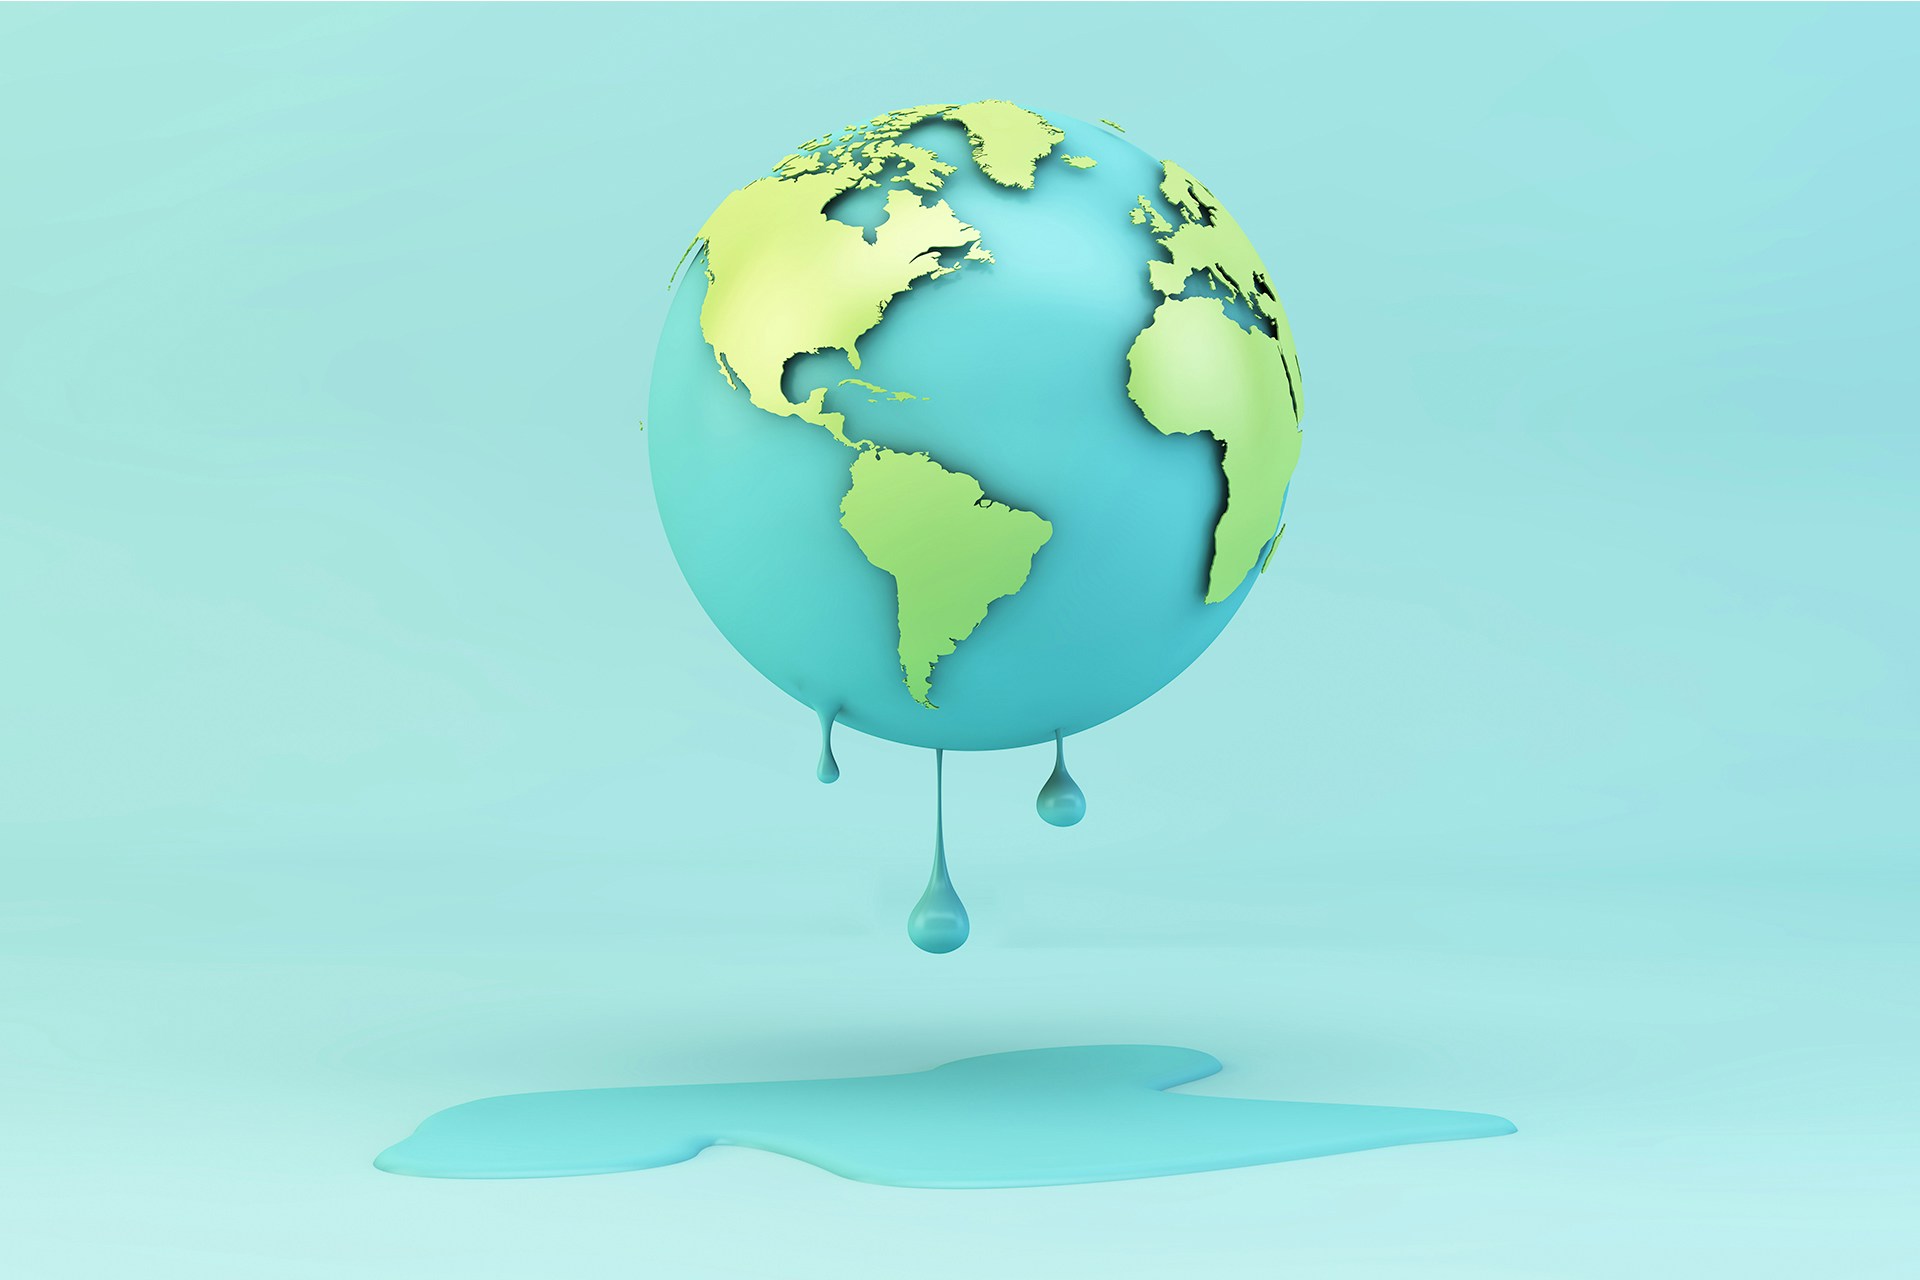 A cartoon model of the Earth that is melting. Below the floating Earth is a puddle. In this blog post, we examine how the topic of climate change is being discussed on social media.